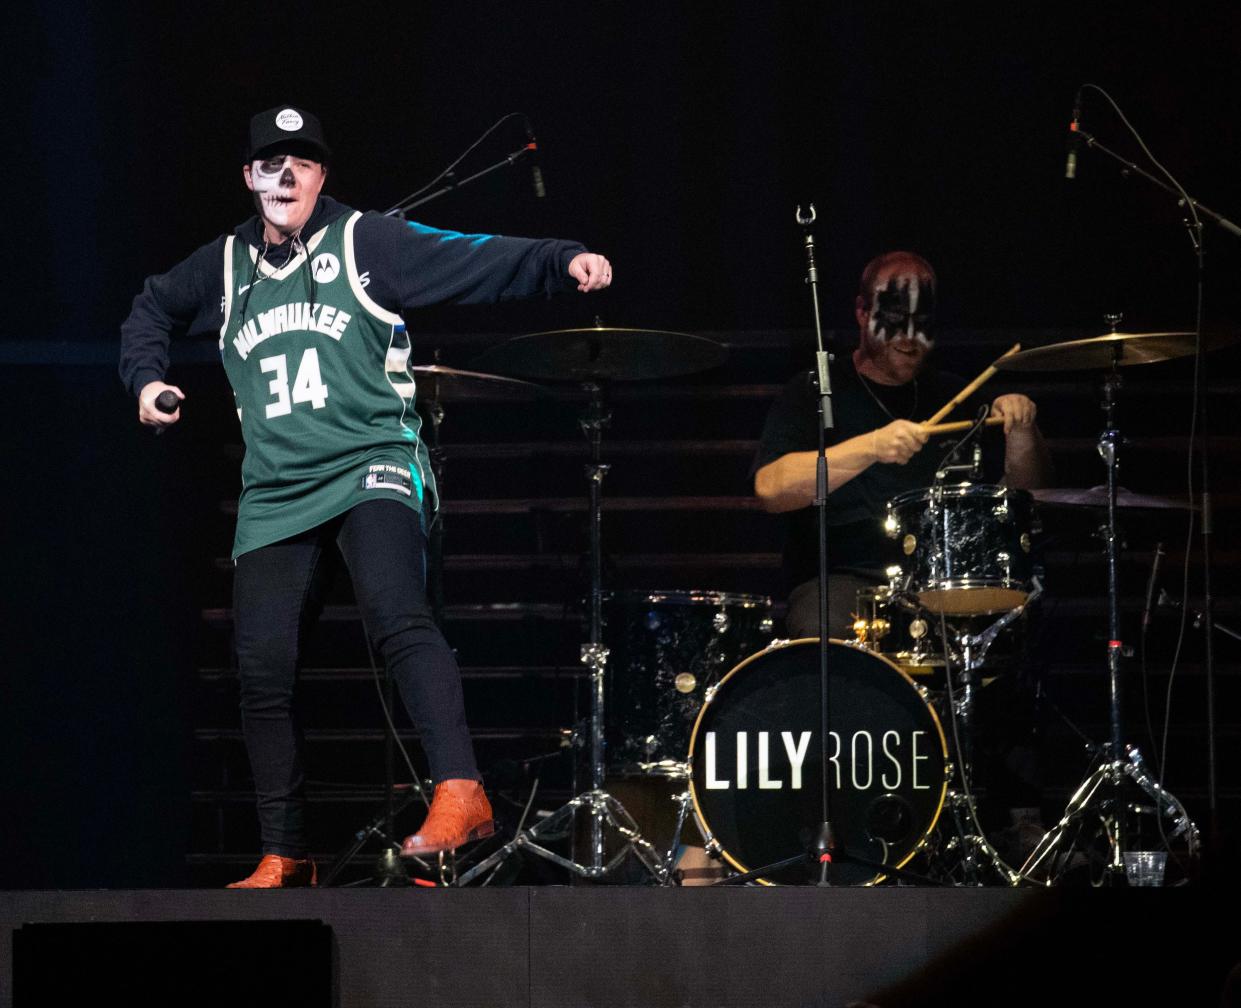 Lily Rose performs on stage at the Fiserv Forum in Milwaukee, Wis. on Tuesday, Oct. 31, 2023. Lily Rose is the opening act for Shania Twain's Queen of Me Tour.